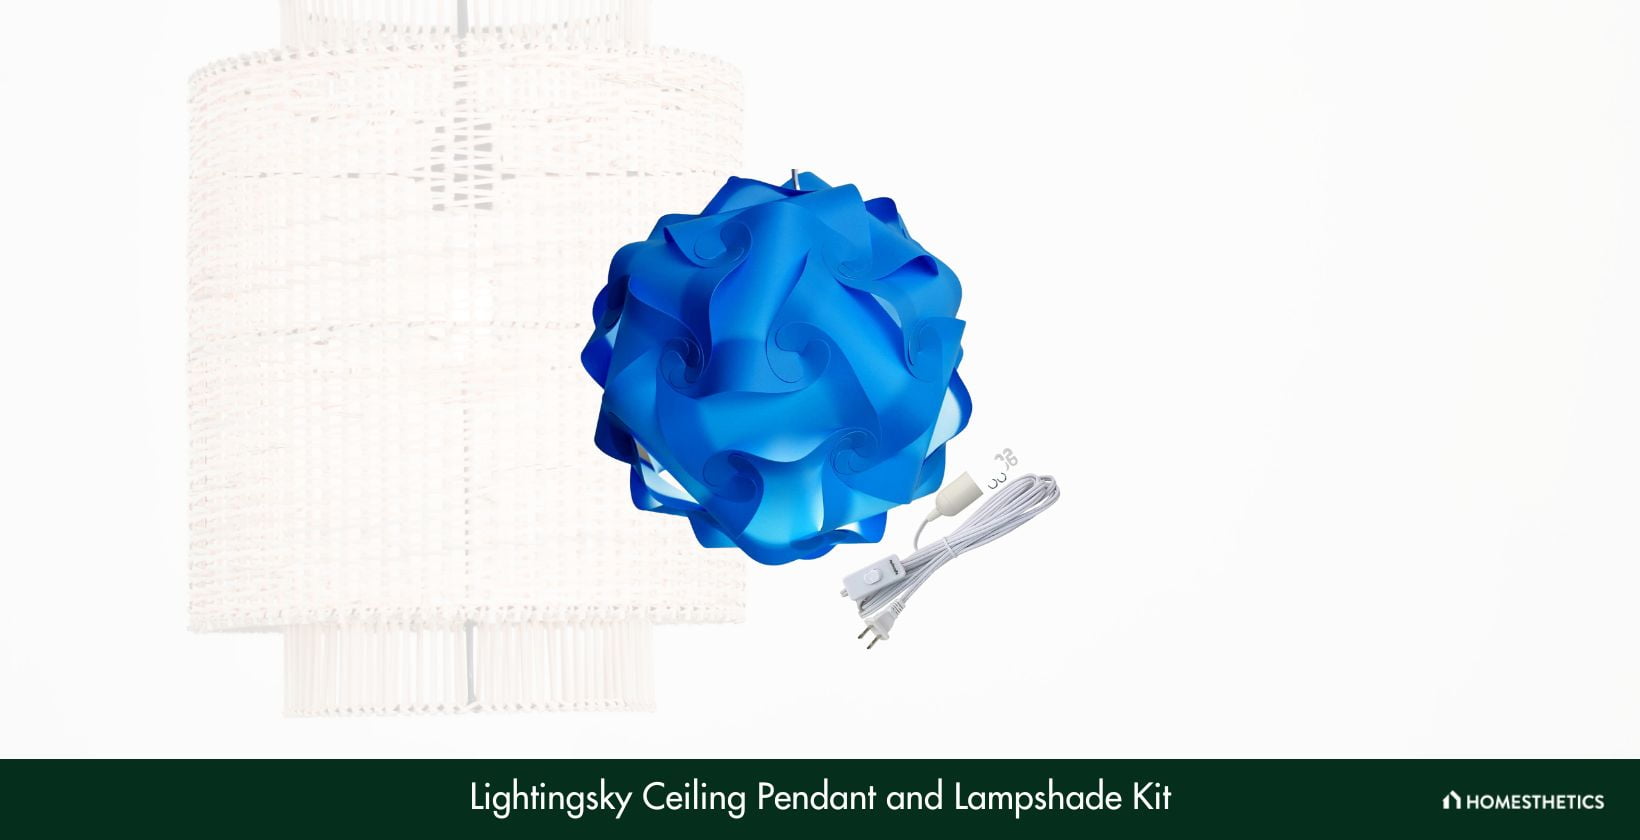 Lightingsky Ceiling Pendant and Lampshade Kit